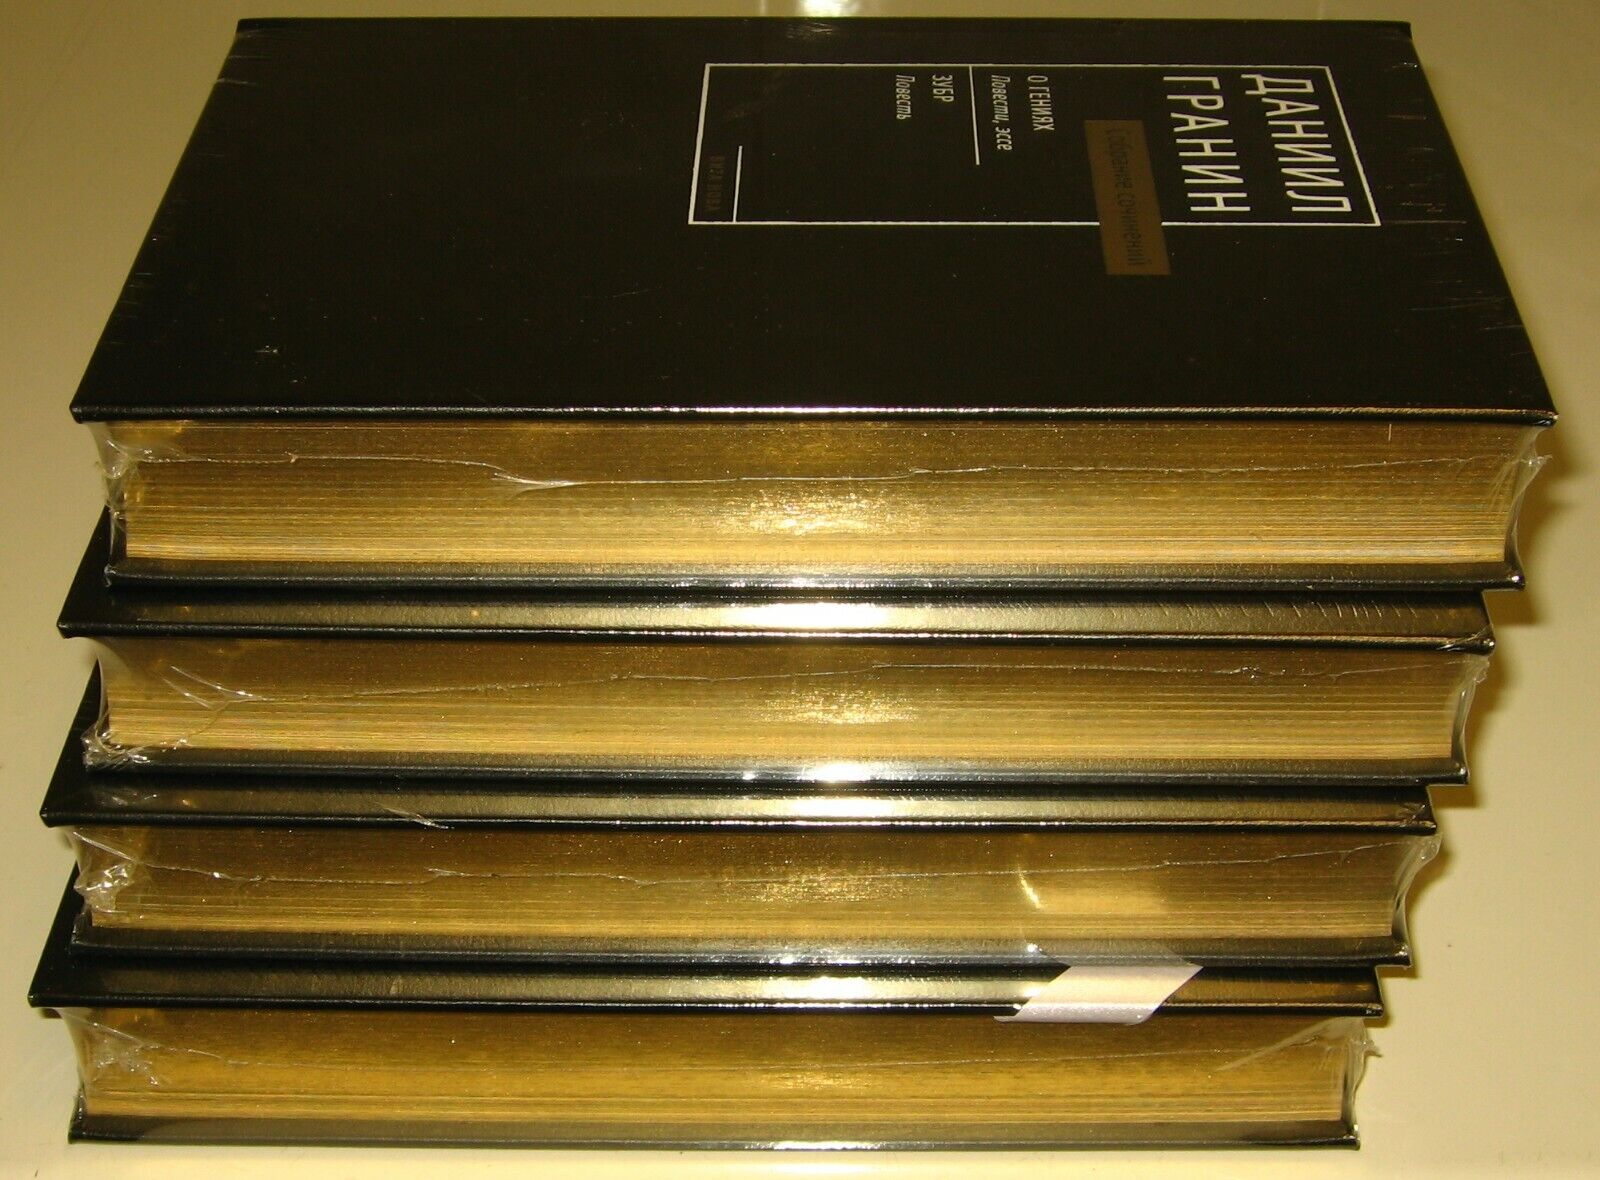 11438.Russian Book: Granin. Collected works 8 volumes. Numbered copy of 90. 2009